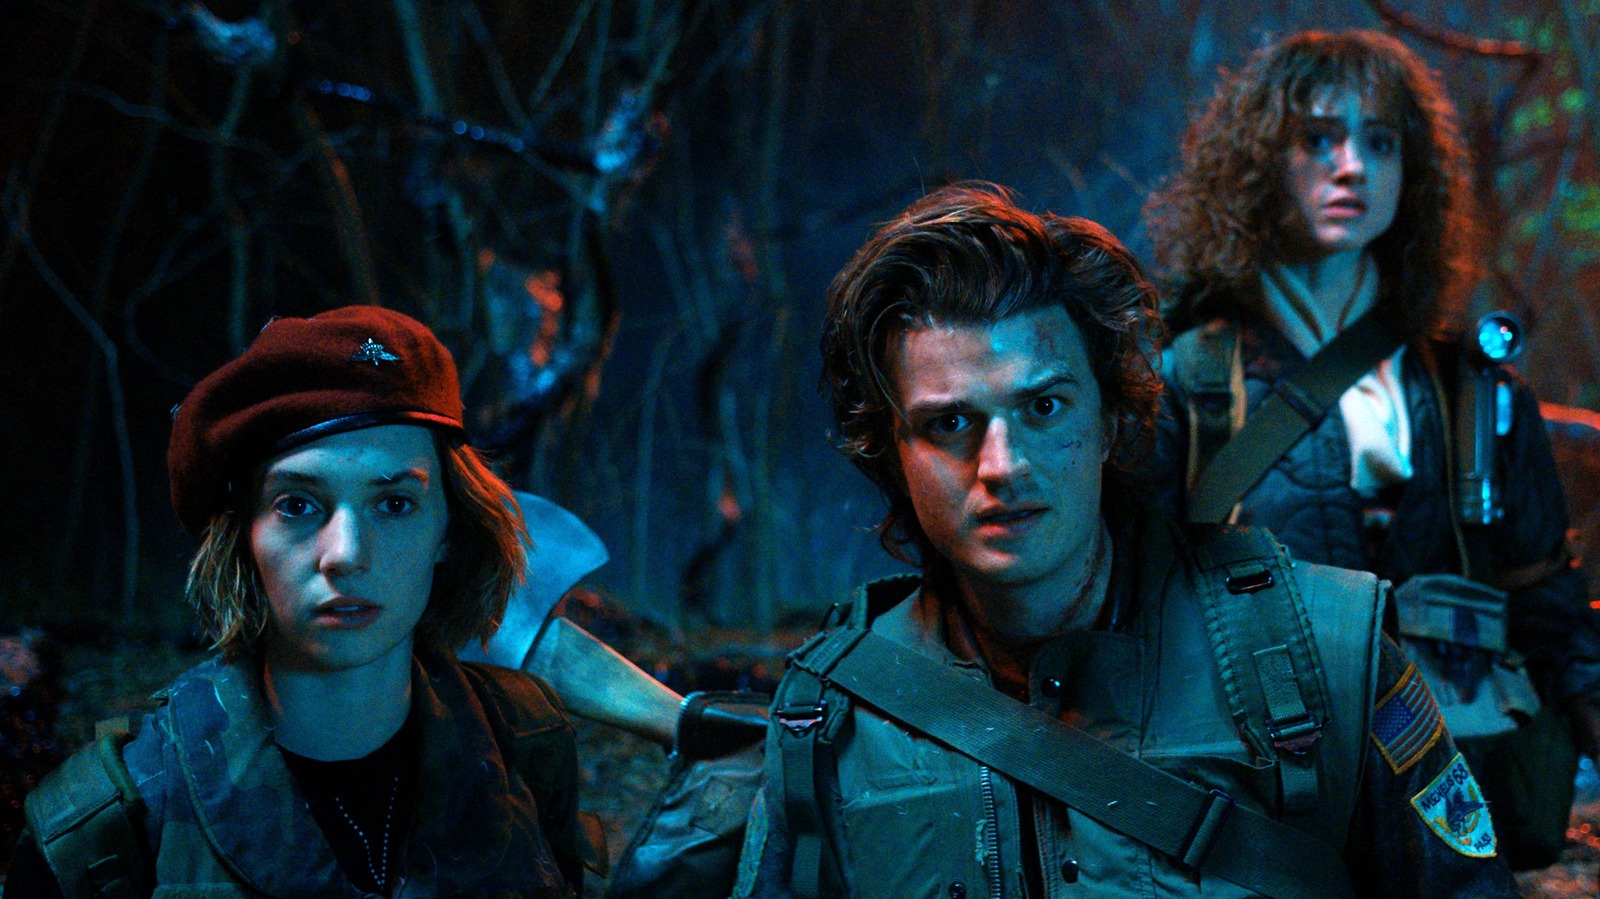 Stranger Things season 4 director says Volume 2 will punch you right in  the heart